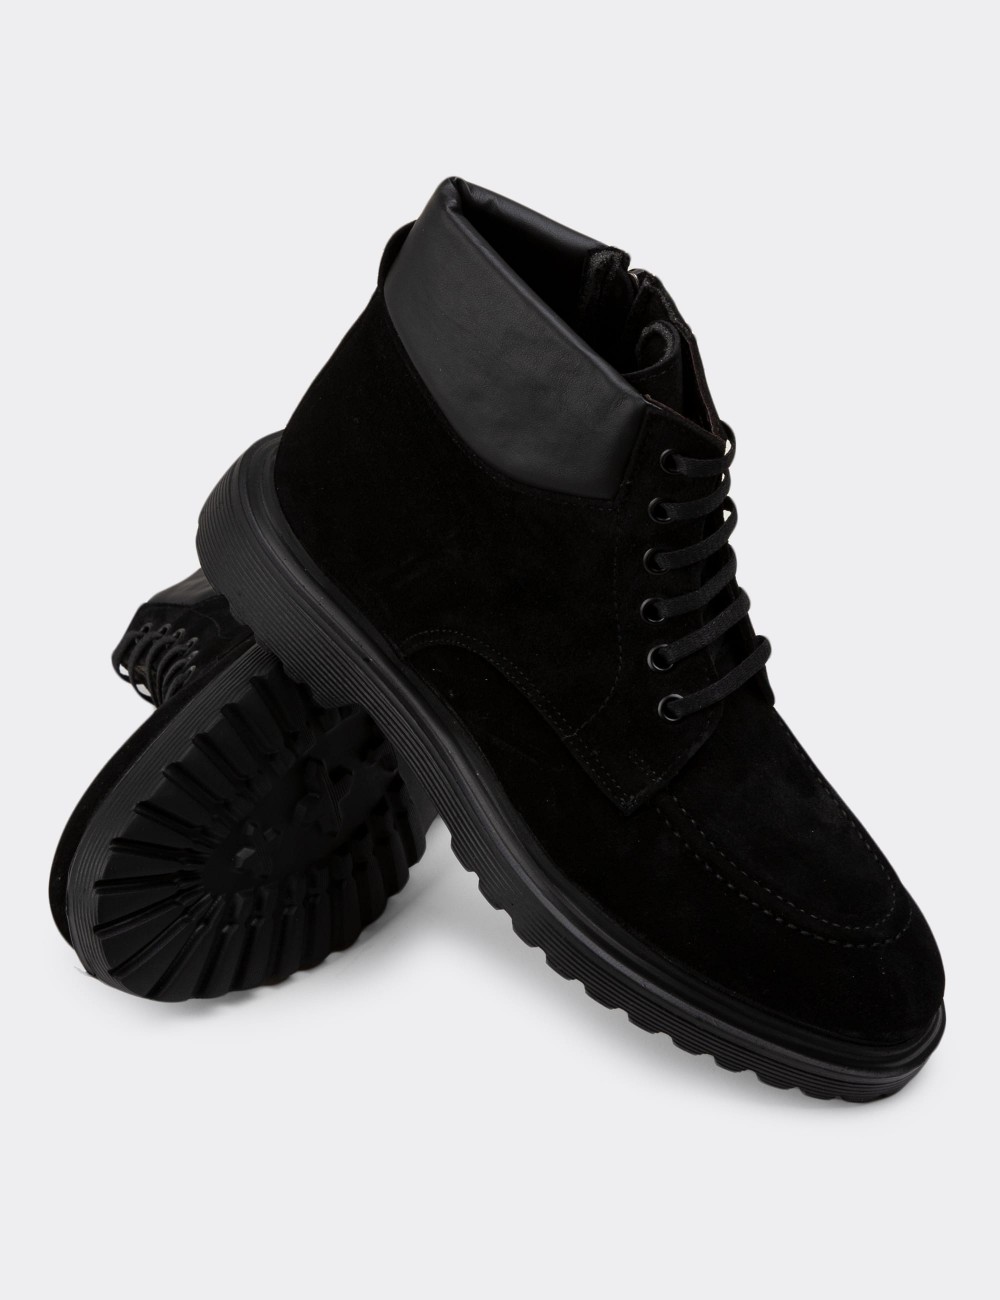 Black Suede Leather Boots - 01929MSYHE02